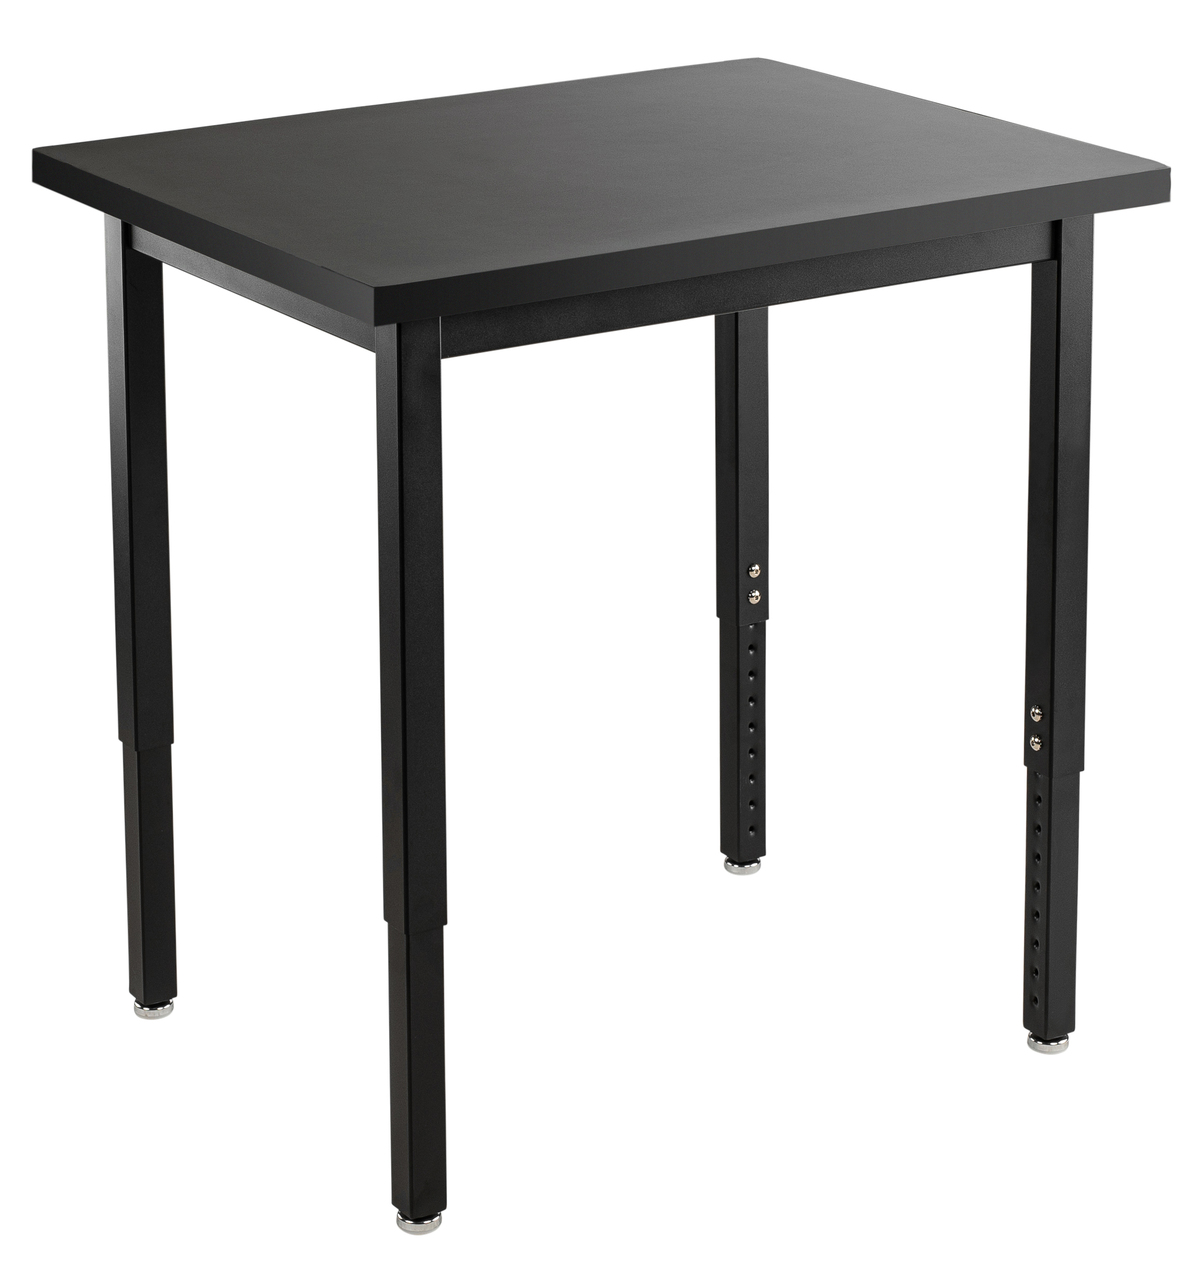 NPS Steel Science Lab Table -  24" x 30" -  Phenolic Top - Black Surface Color